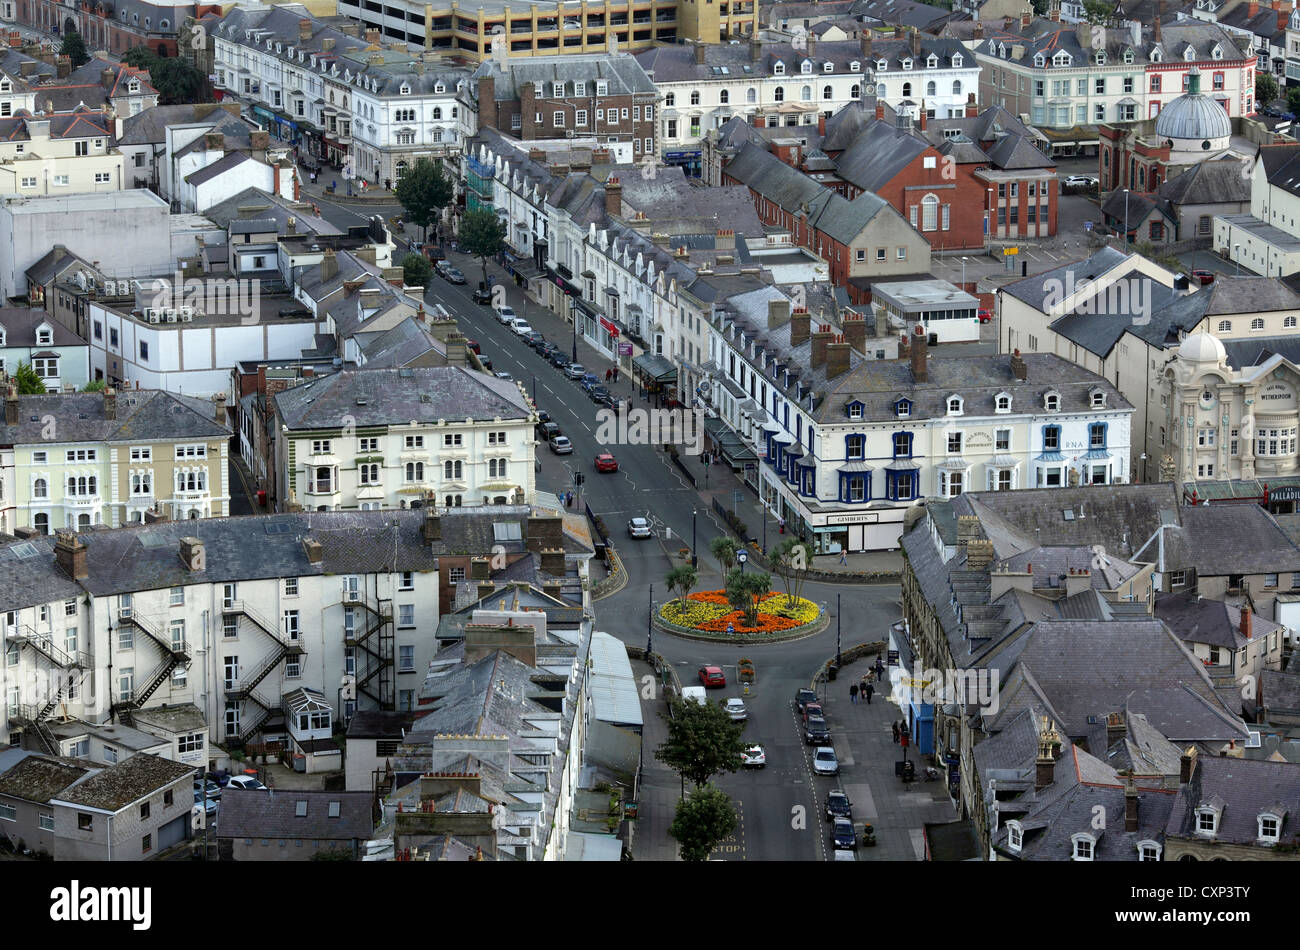 Looking down on Mostyn Street, Llandudno town centre, from the Great Orme. Stock Photo